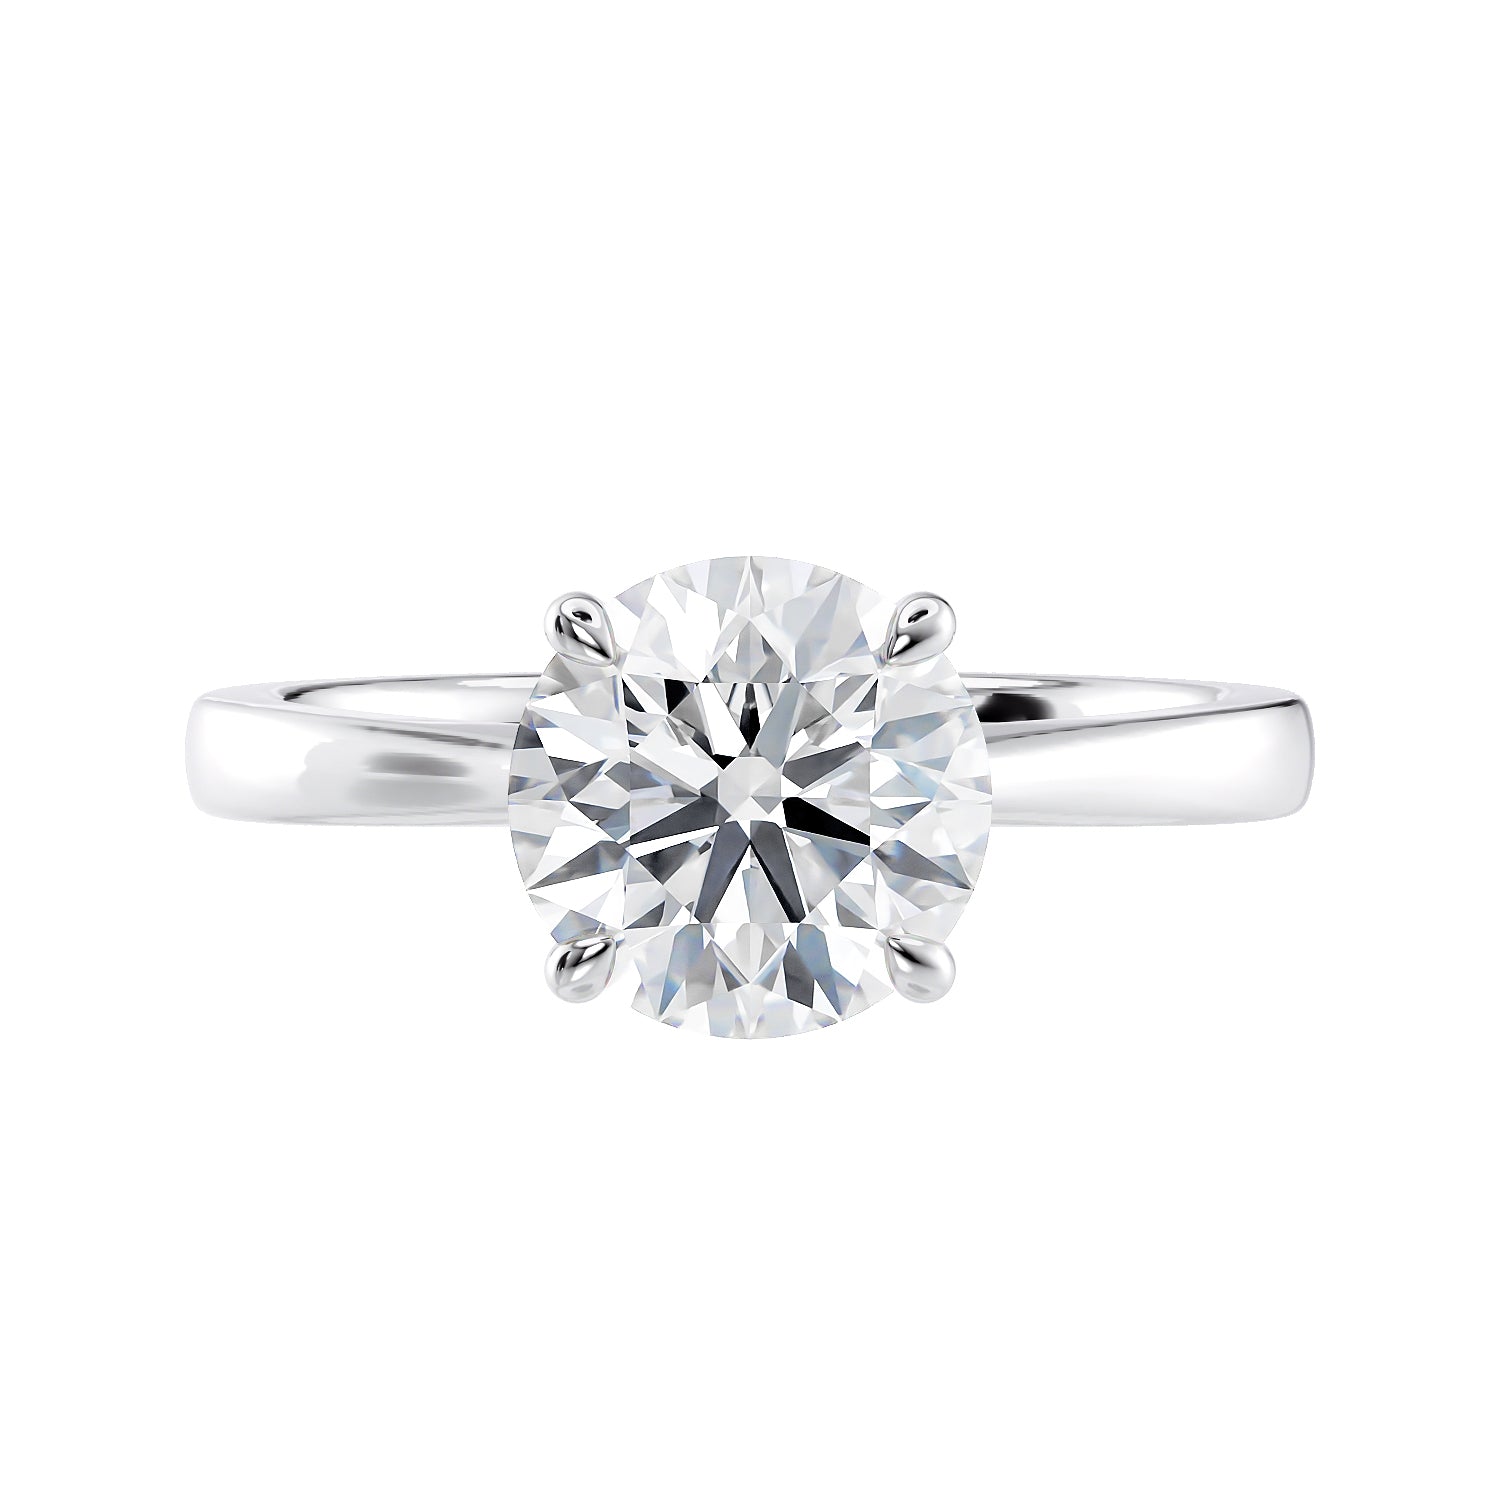 Natural round diamond engagement ring with a tapered white gold band front view.